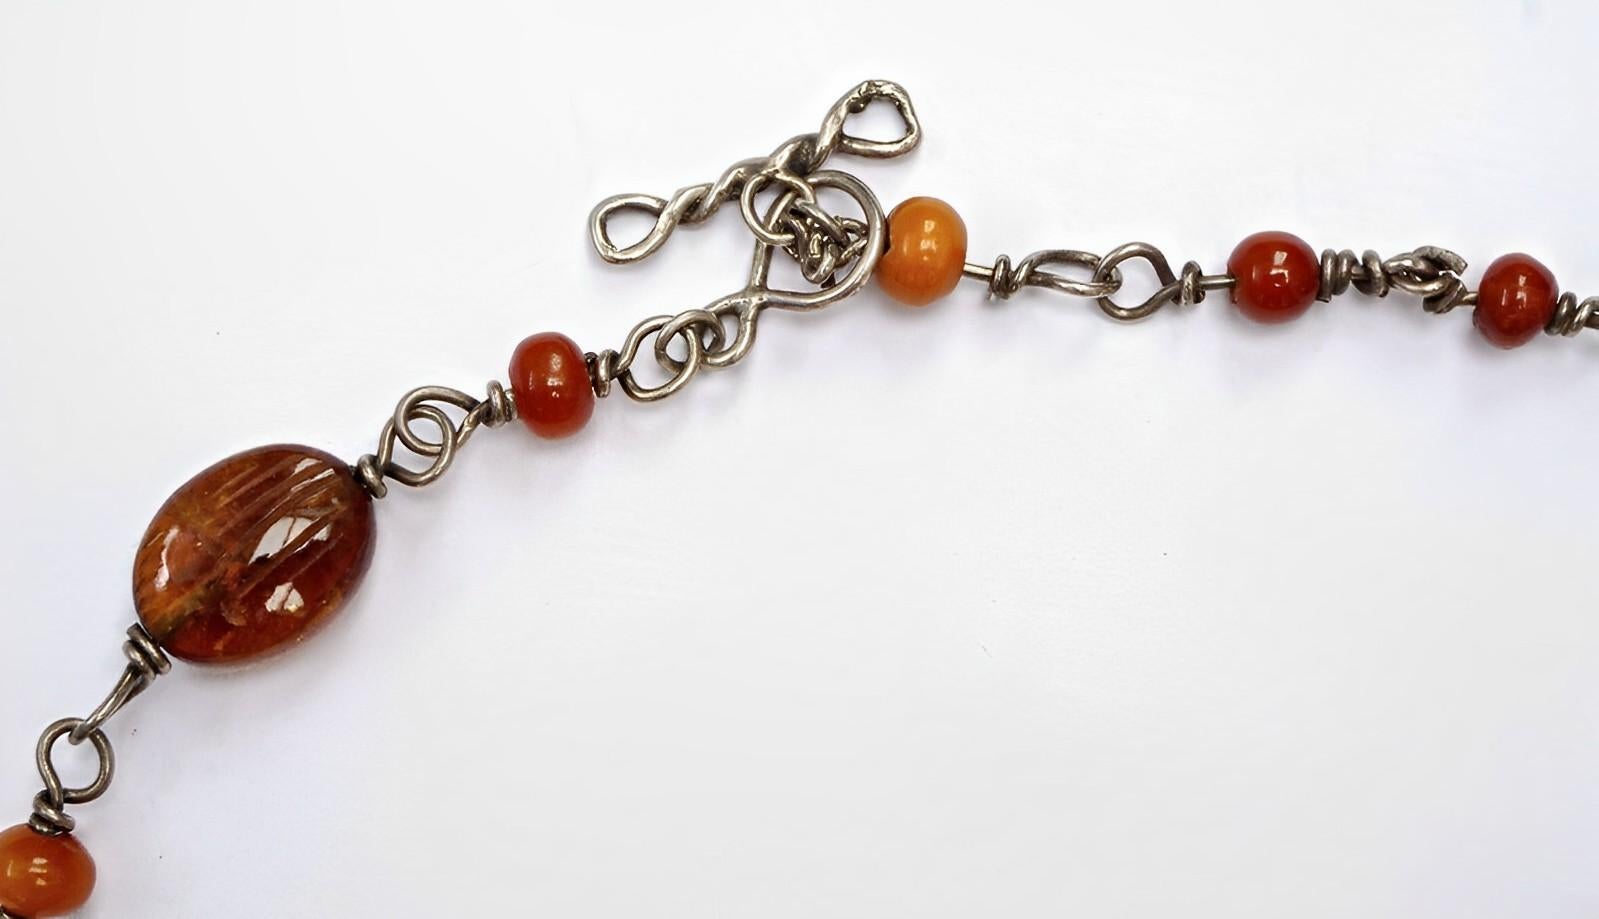 Wonderful silver necklace with floral etched amber beads, and a toggle clasp. There are no hallmarks, the necklace tests as silver. Measuring length 46.5cms / 18.3 inches. The largest beads are approximately 1.6cm / .63 inch by 1.2cm / .47 inch. One